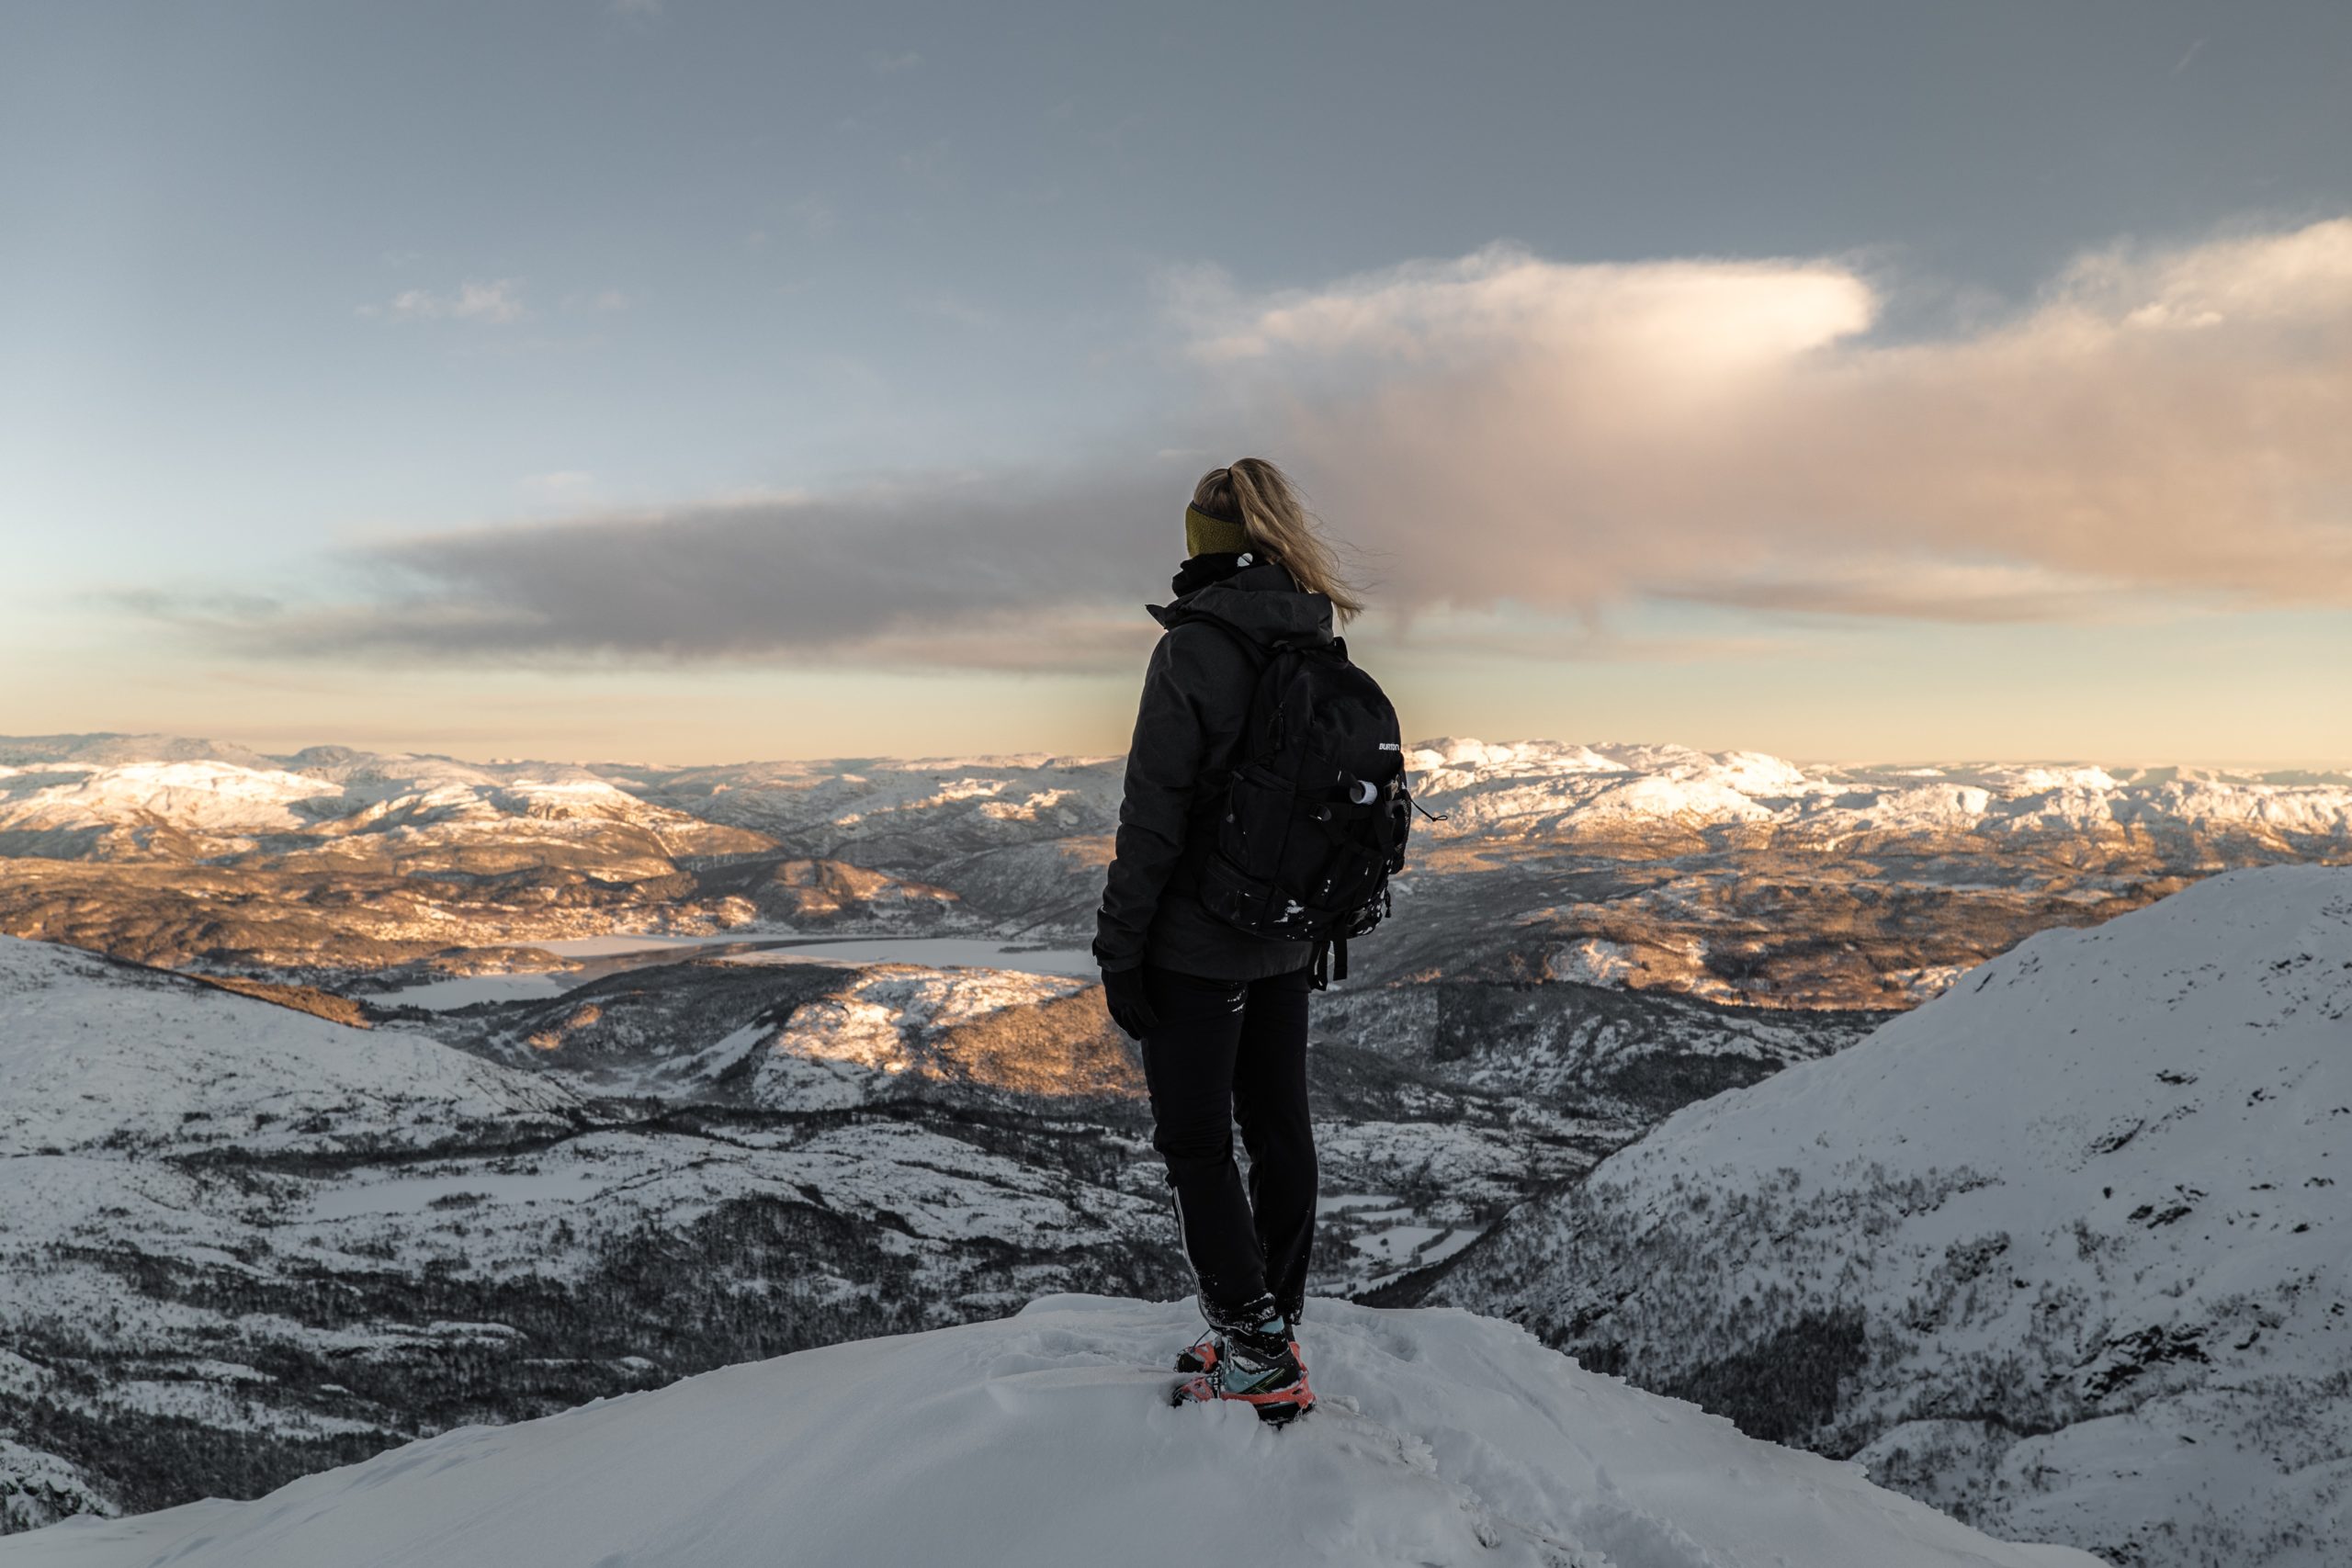 A hiker stands with their back to the camera, gazing down from the top of a mountain onto mountains, a lake, and plains covered in snow. They're wearing a headband, winter coat, and a backpack.